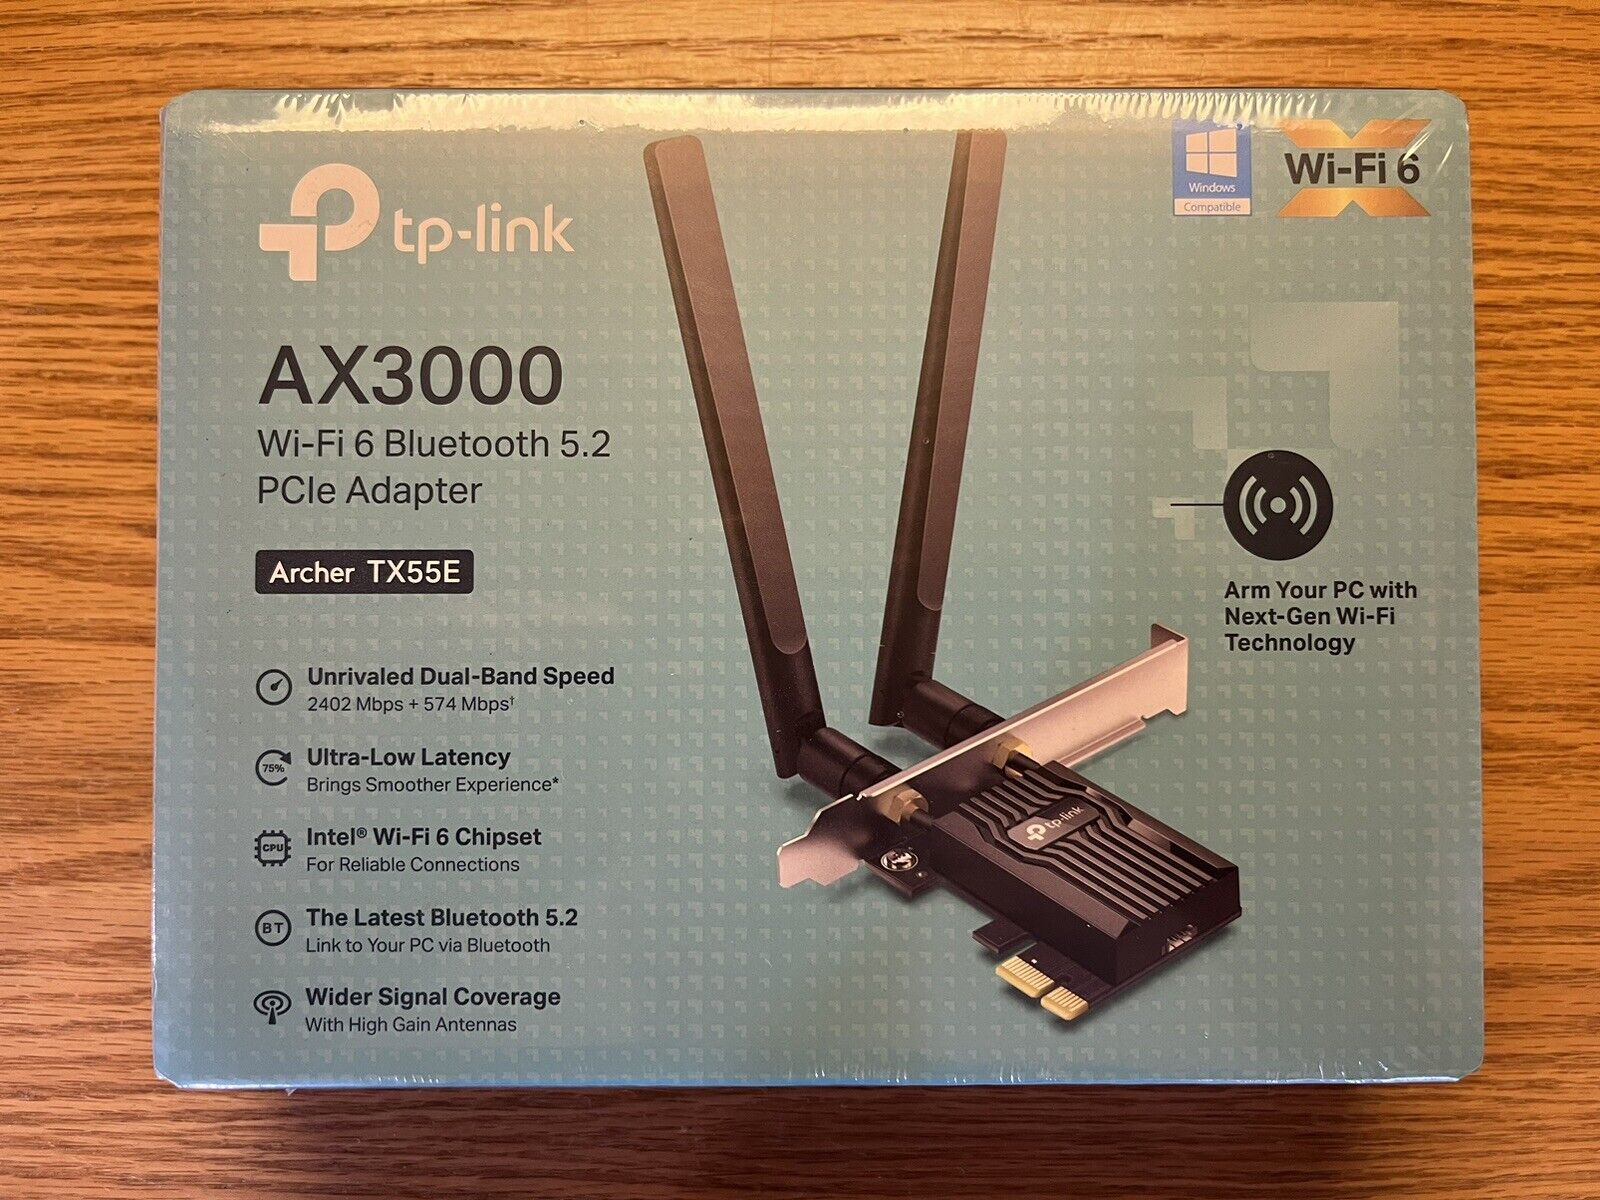 TP-LINK Archer TX55E AX3000  Wi-Fi 6 + Bluetooth 5.2  PCIe Gaming Adapter Card